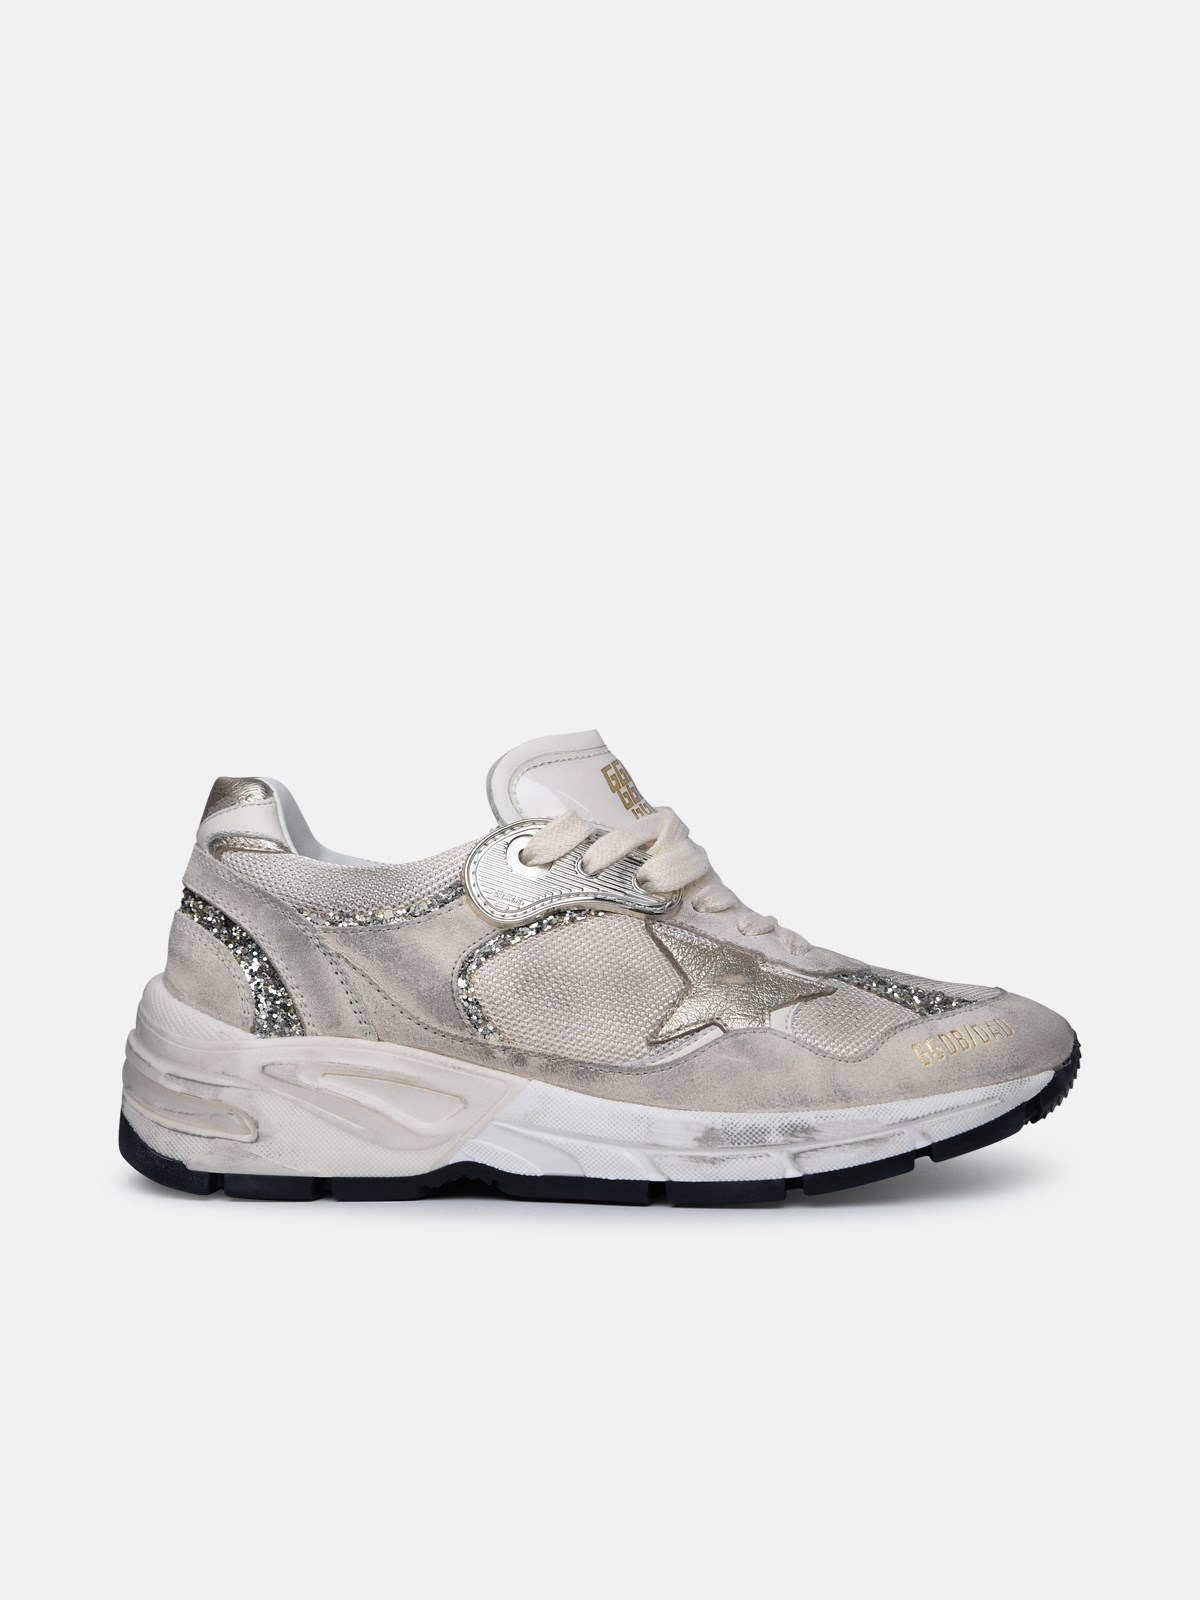 Golden Goose 'running Sole' Ivory Leather Sneakers